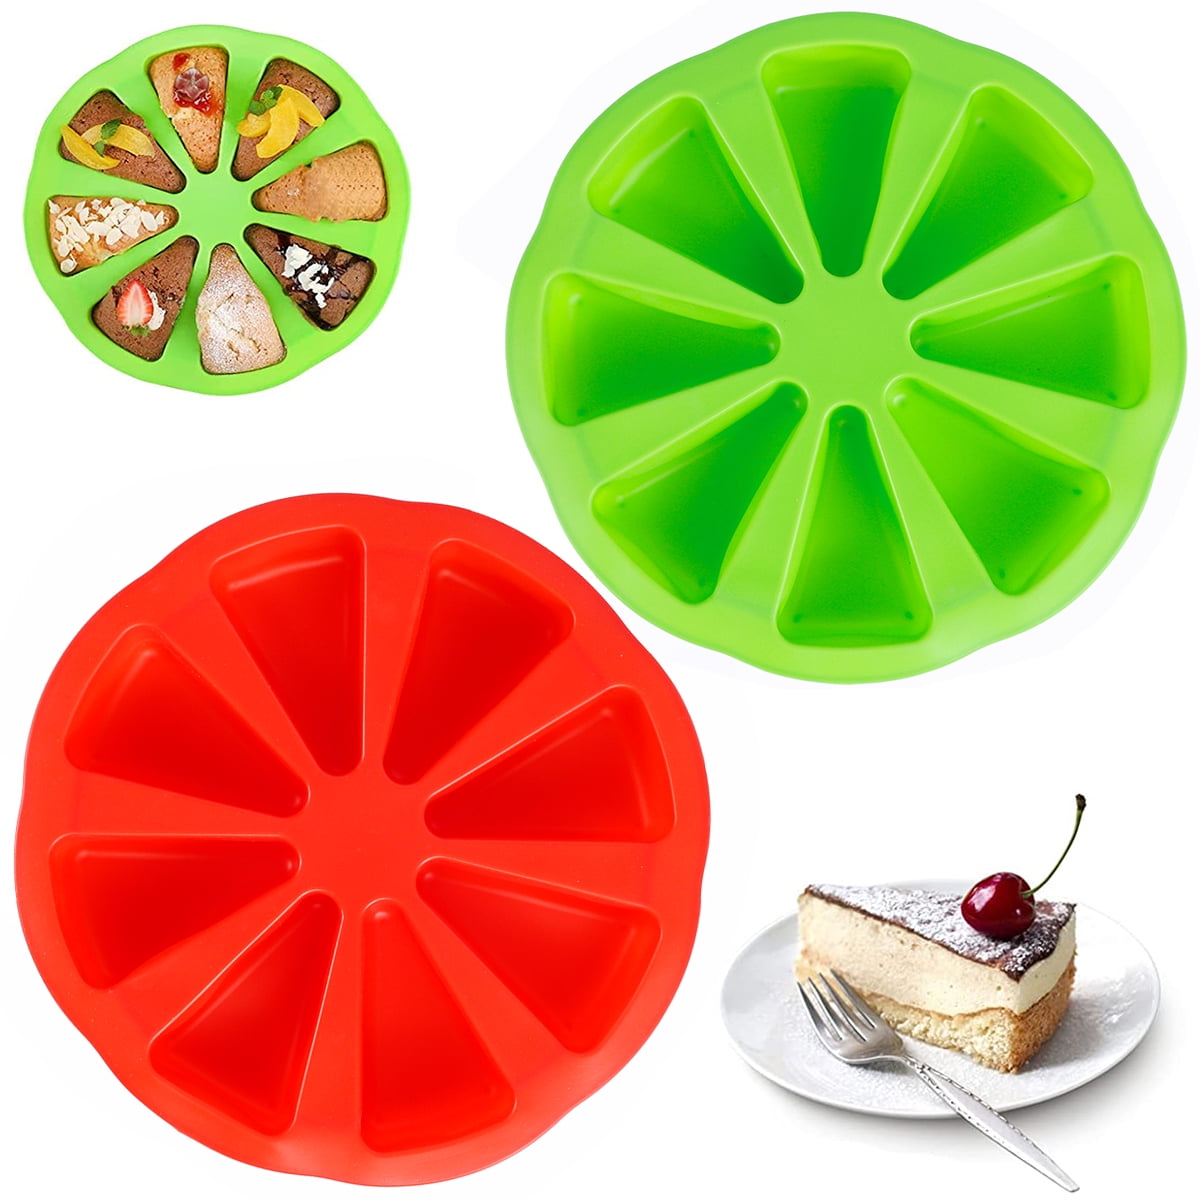  3 Pack Silicone Donut Molds, FineGood 6 Cavity Non-Stick  Full-Sized Safe Baking Tray Maker Pan Heat Resistance for Cake Biscuit  Bagels Muffins-Orange, Rose Red, Green : Home & Kitchen